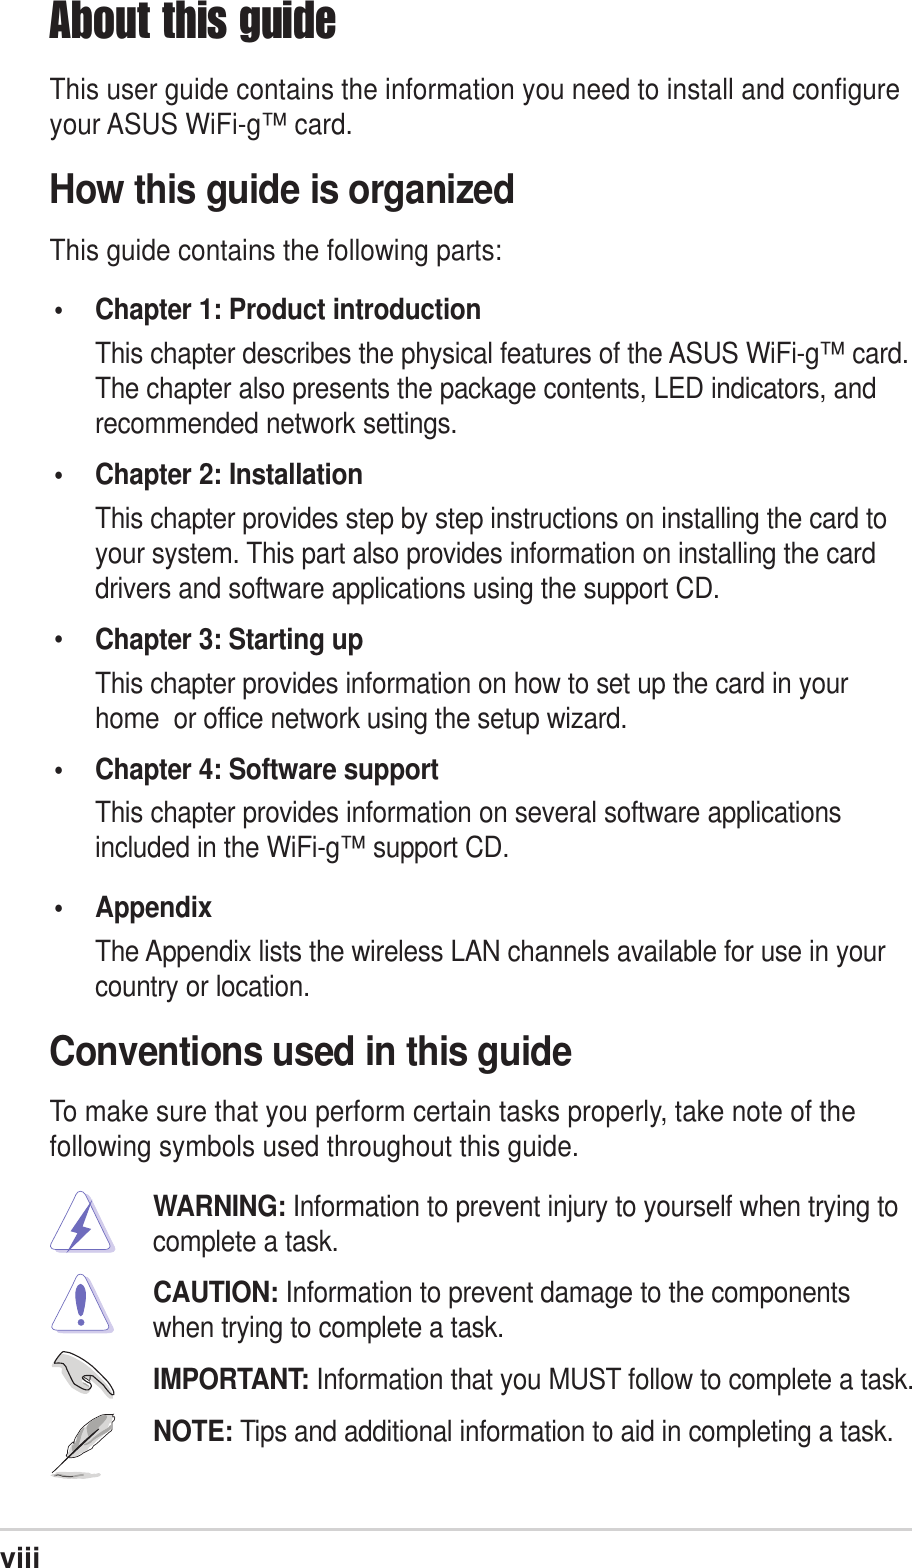 viiiAbout this guideThis user guide contains the information you need to install and configureyour ASUS WiFi-g™ card.How this guide is organizedThis guide contains the following parts:• Chapter 1: Product introductionThis chapter describes the physical features of the ASUS WiFi-g™ card.The chapter also presents the package contents, LED indicators, andrecommended network settings.• Chapter 2: InstallationThis chapter provides step by step instructions on installing the card toyour system. This part also provides information on installing the carddrivers and software applications using the support CD.•Chapter 3: Starting upThis chapter provides information on how to set up the card in yourhome  or office network using the setup wizard.• Chapter 4: Software supportThis chapter provides information on several software applicationsincluded in the WiFi-g™ support CD.• AppendixThe Appendix lists the wireless LAN channels available for use in yourcountry or location.Conventions used in this guideTo make sure that you perform certain tasks properly, take note of thefollowing symbols used throughout this guide.WARNING: Information to prevent injury to yourself when trying tocomplete a task.CAUTION: Information to prevent damage to the componentswhen trying to complete a task.IMPORTANT: Information that you MUST follow to complete a task.NOTE: Tips and additional information to aid in completing a task.